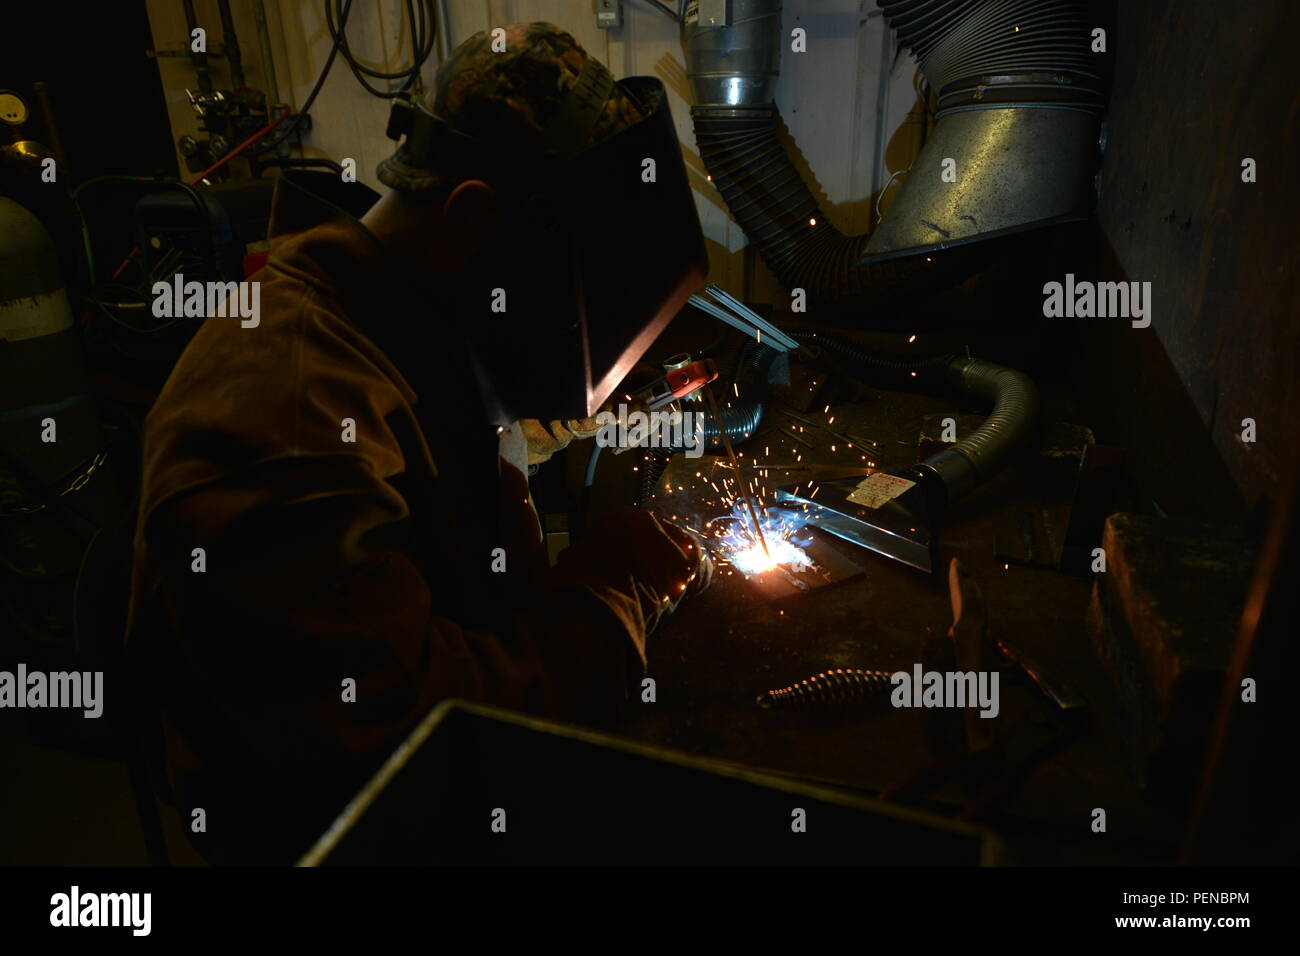 2 - Railway Welding High Resolution Stock Photography and Images - Alamy